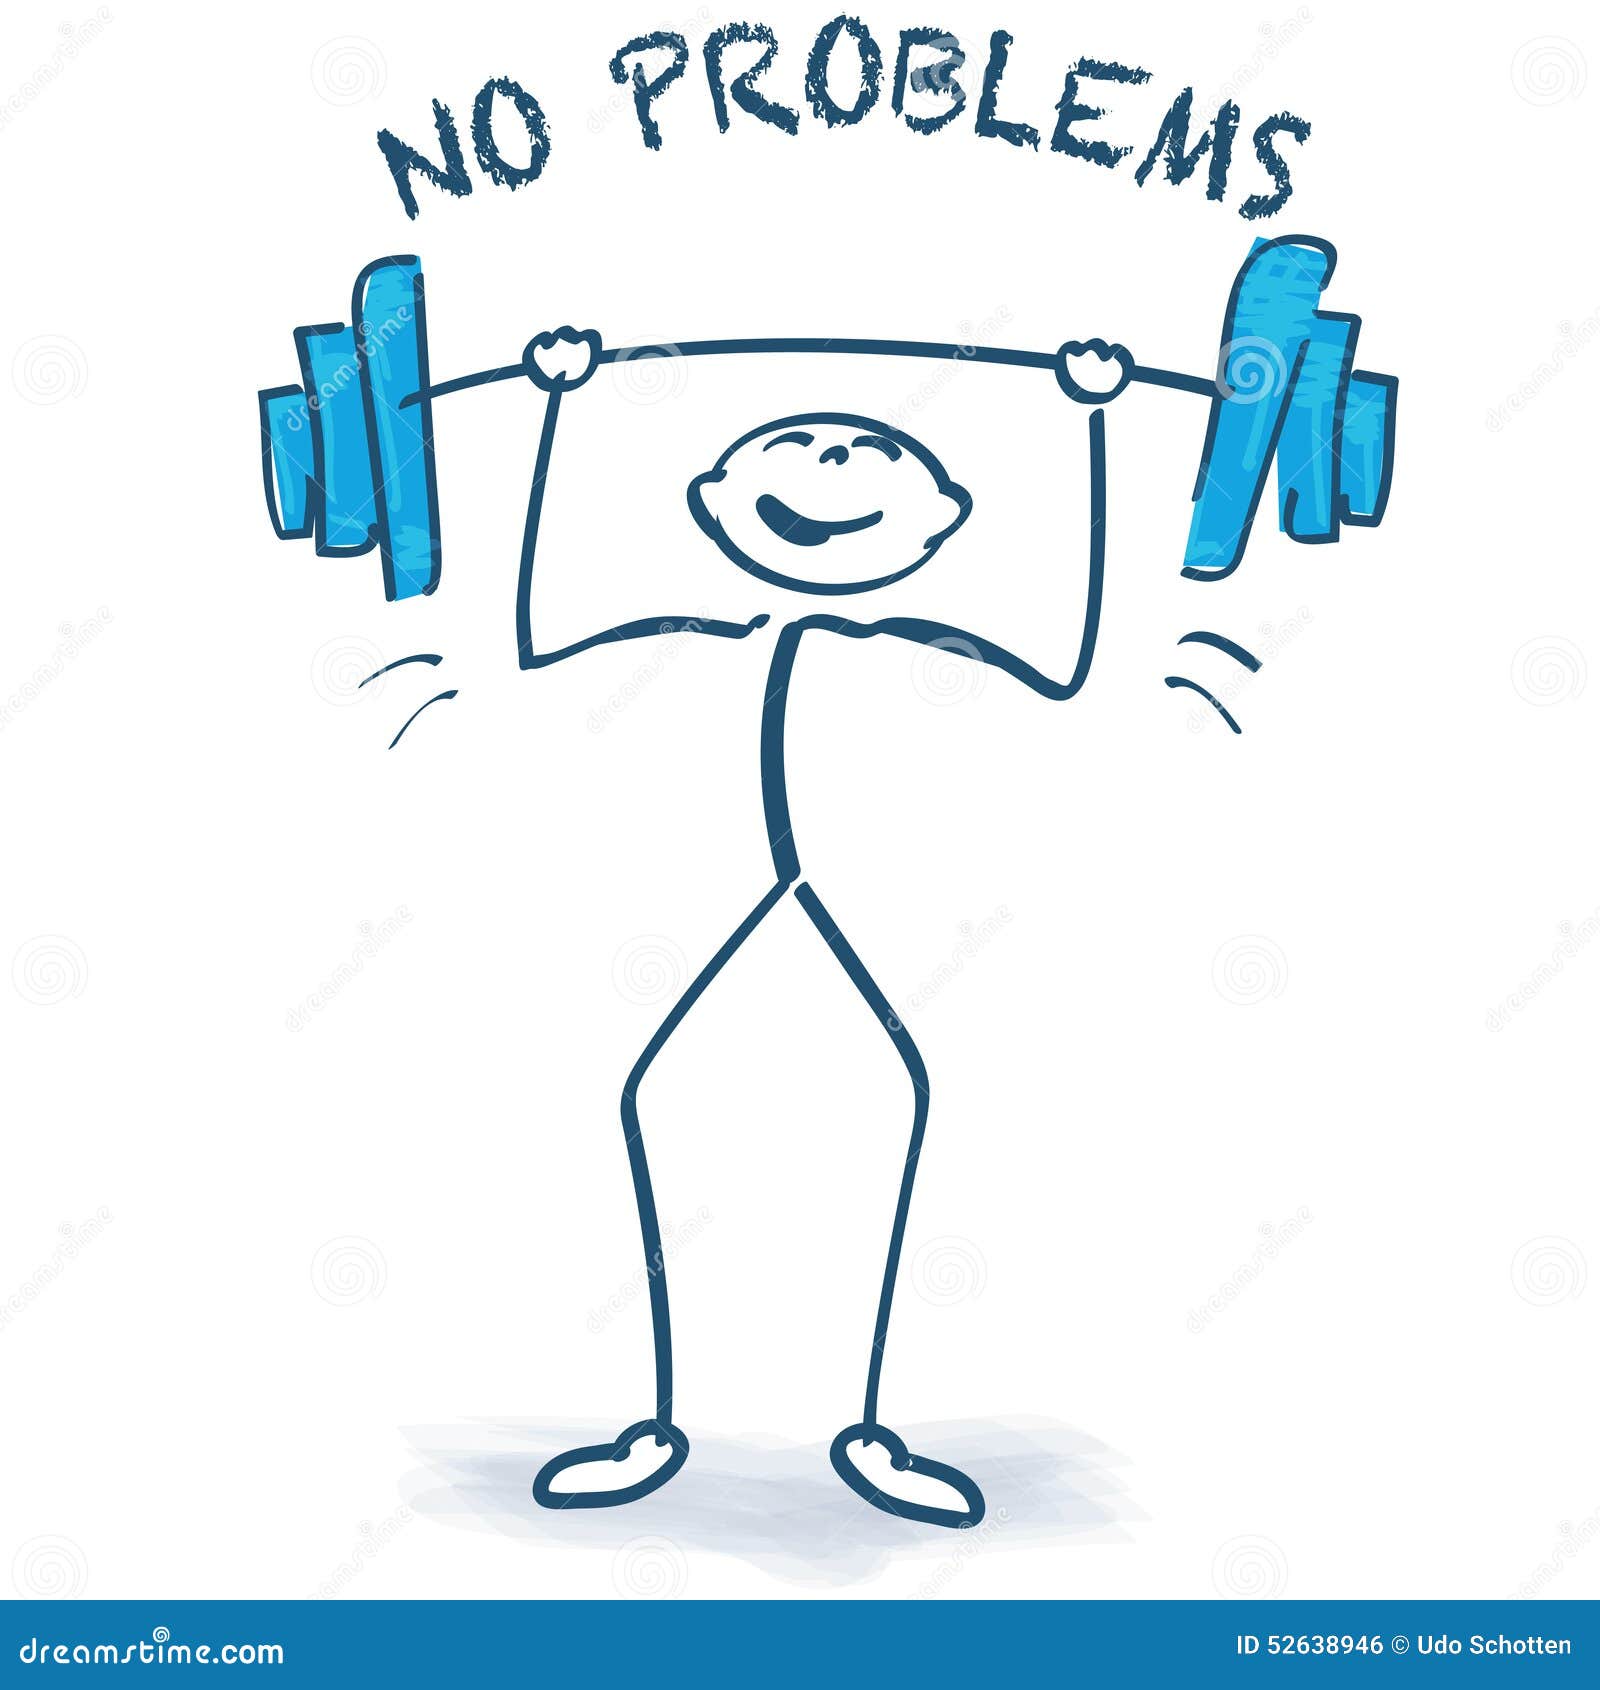 Weight Lifting Man Weightlifting Silhouette Cartoon Vector ...